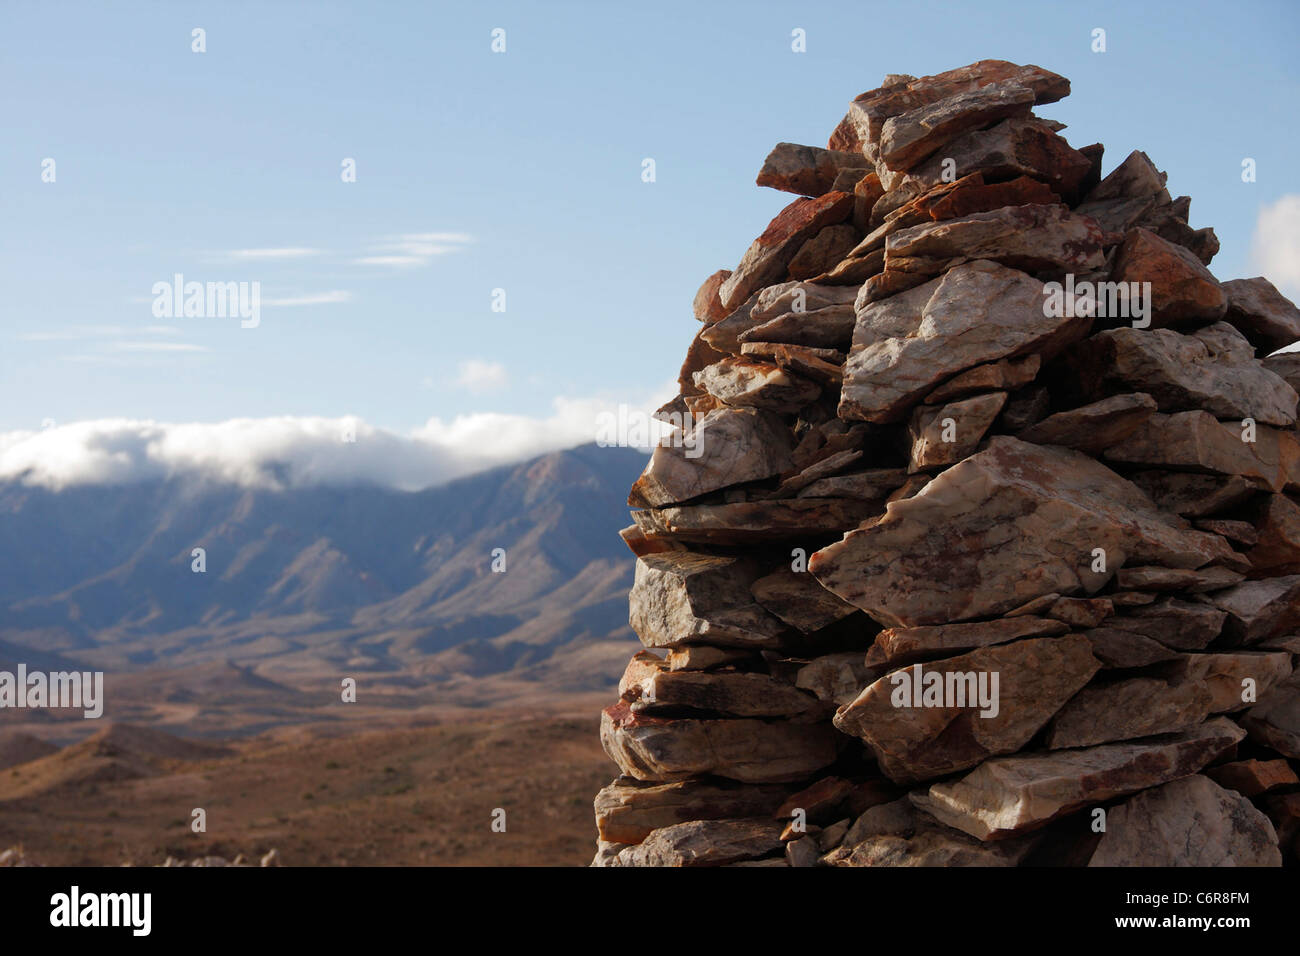 Semi-desert landscape with clouds over the Rosuintjieberg mountains in the distance and stone pile in the foreground. Stock Photo